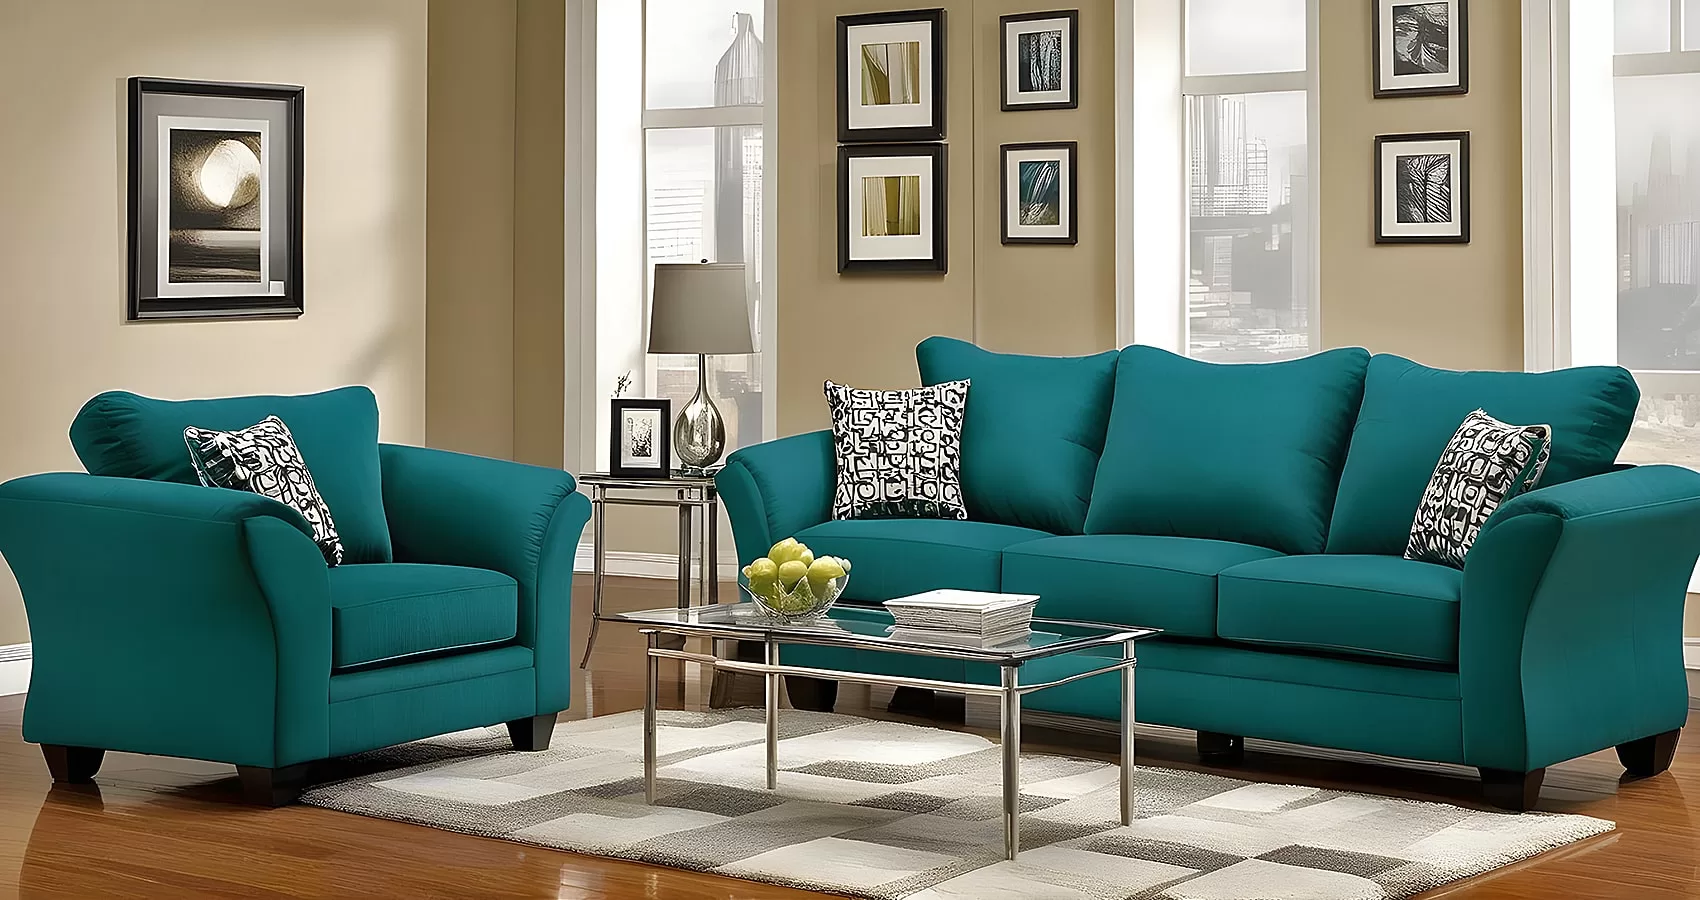 Teal Blue Couch | Teal Blue Sofa: A Bold Statement of Elegance and Decorative Versatility